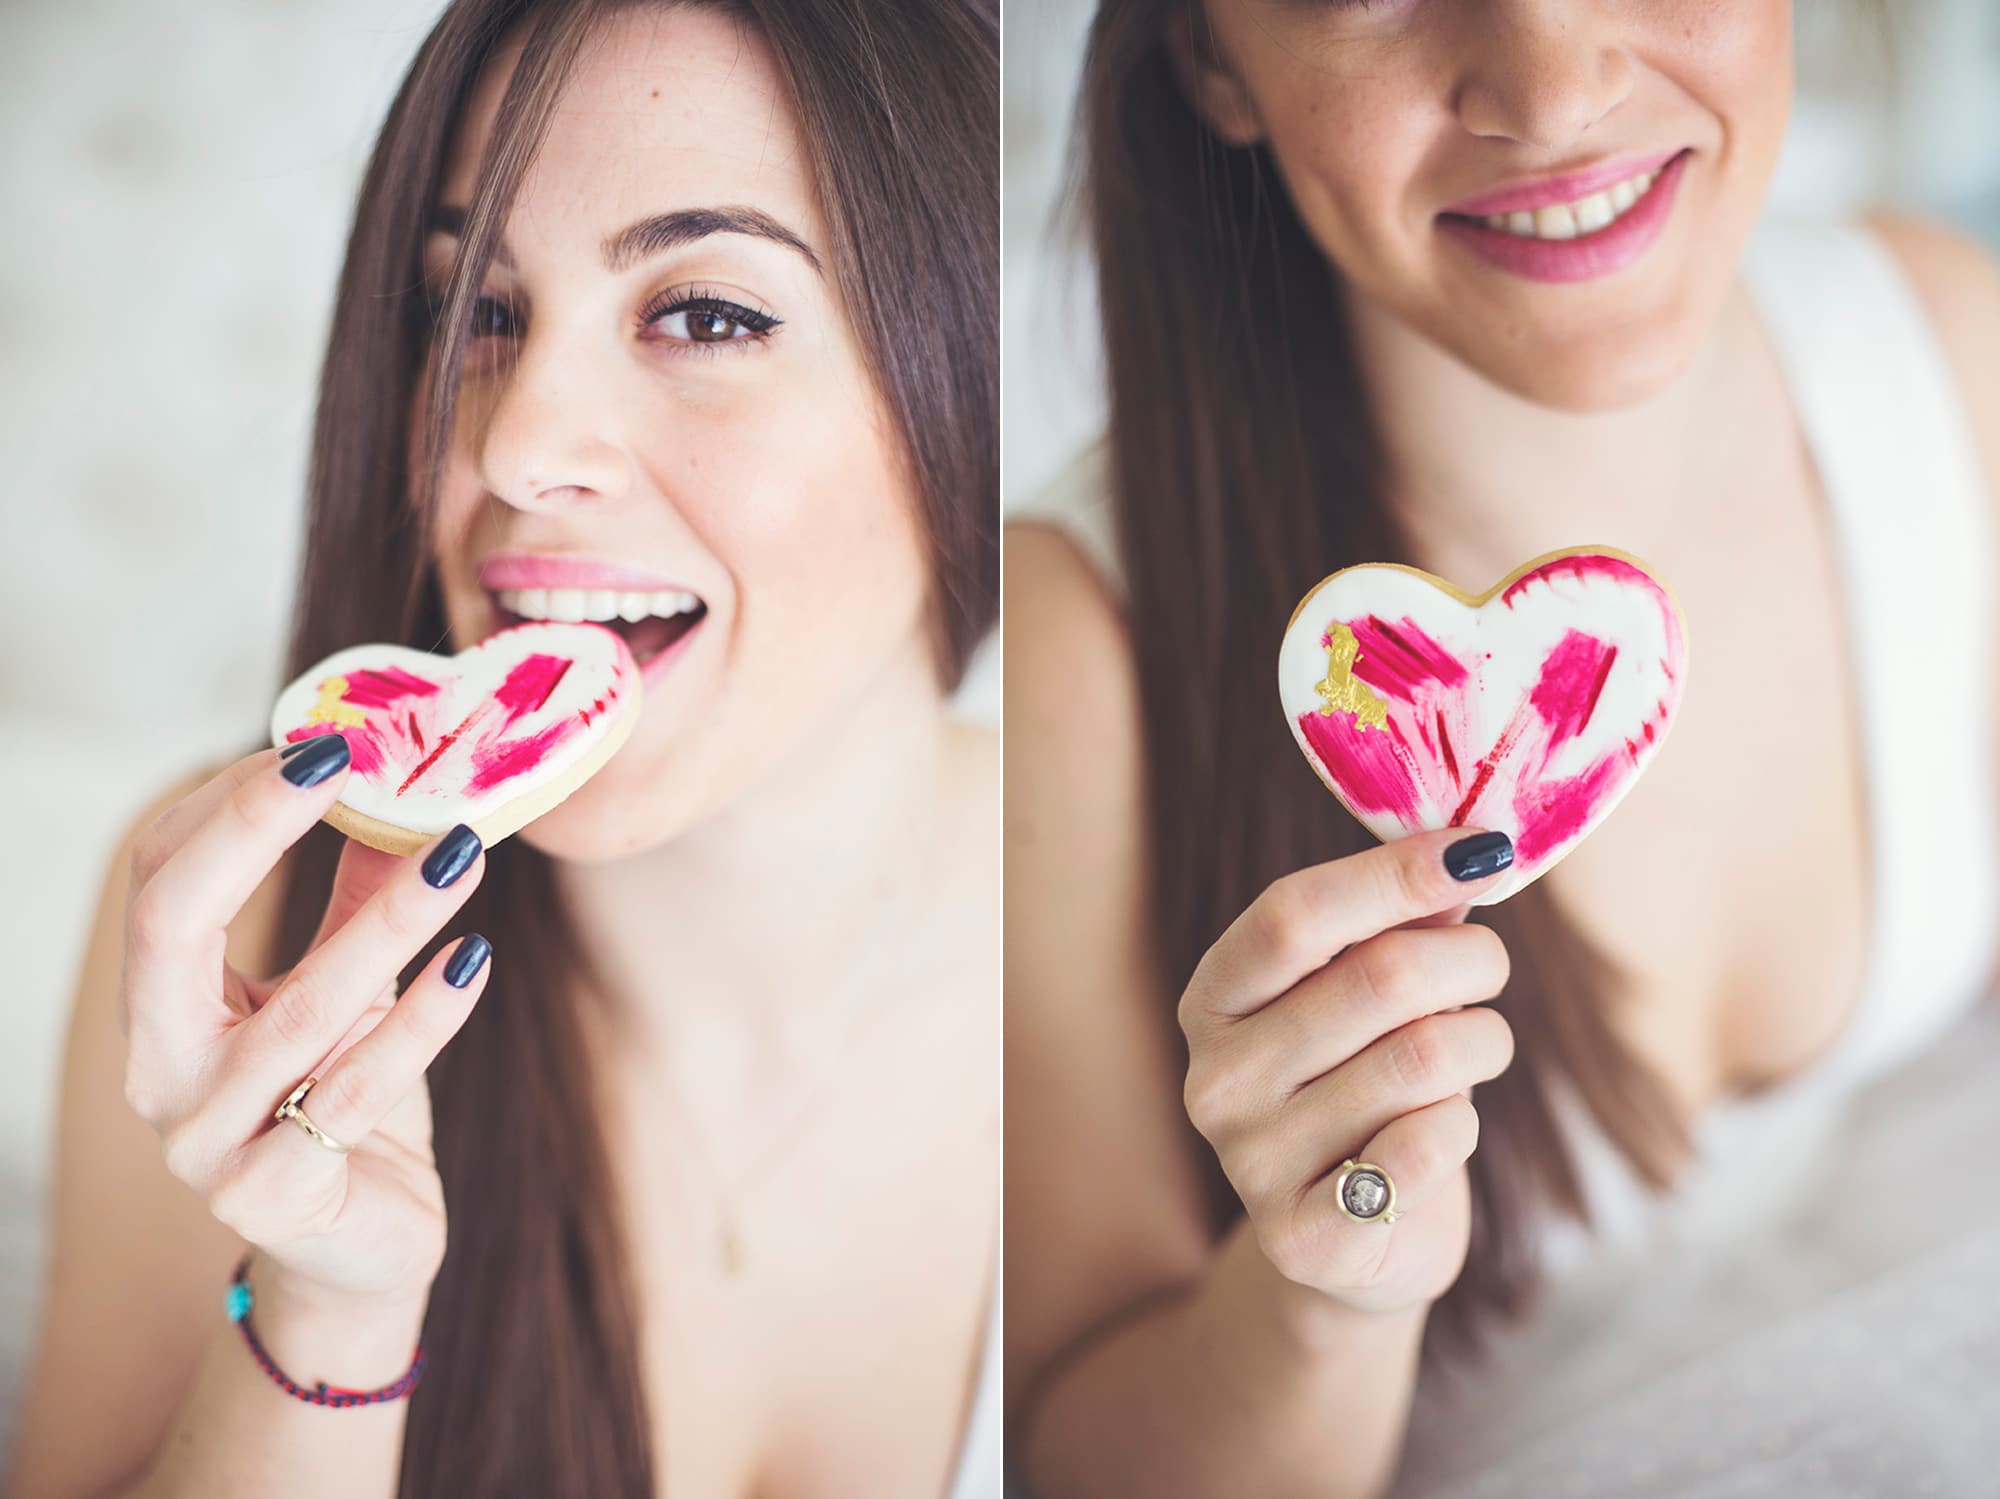 5 tips for the perfect St. Valentine's date!